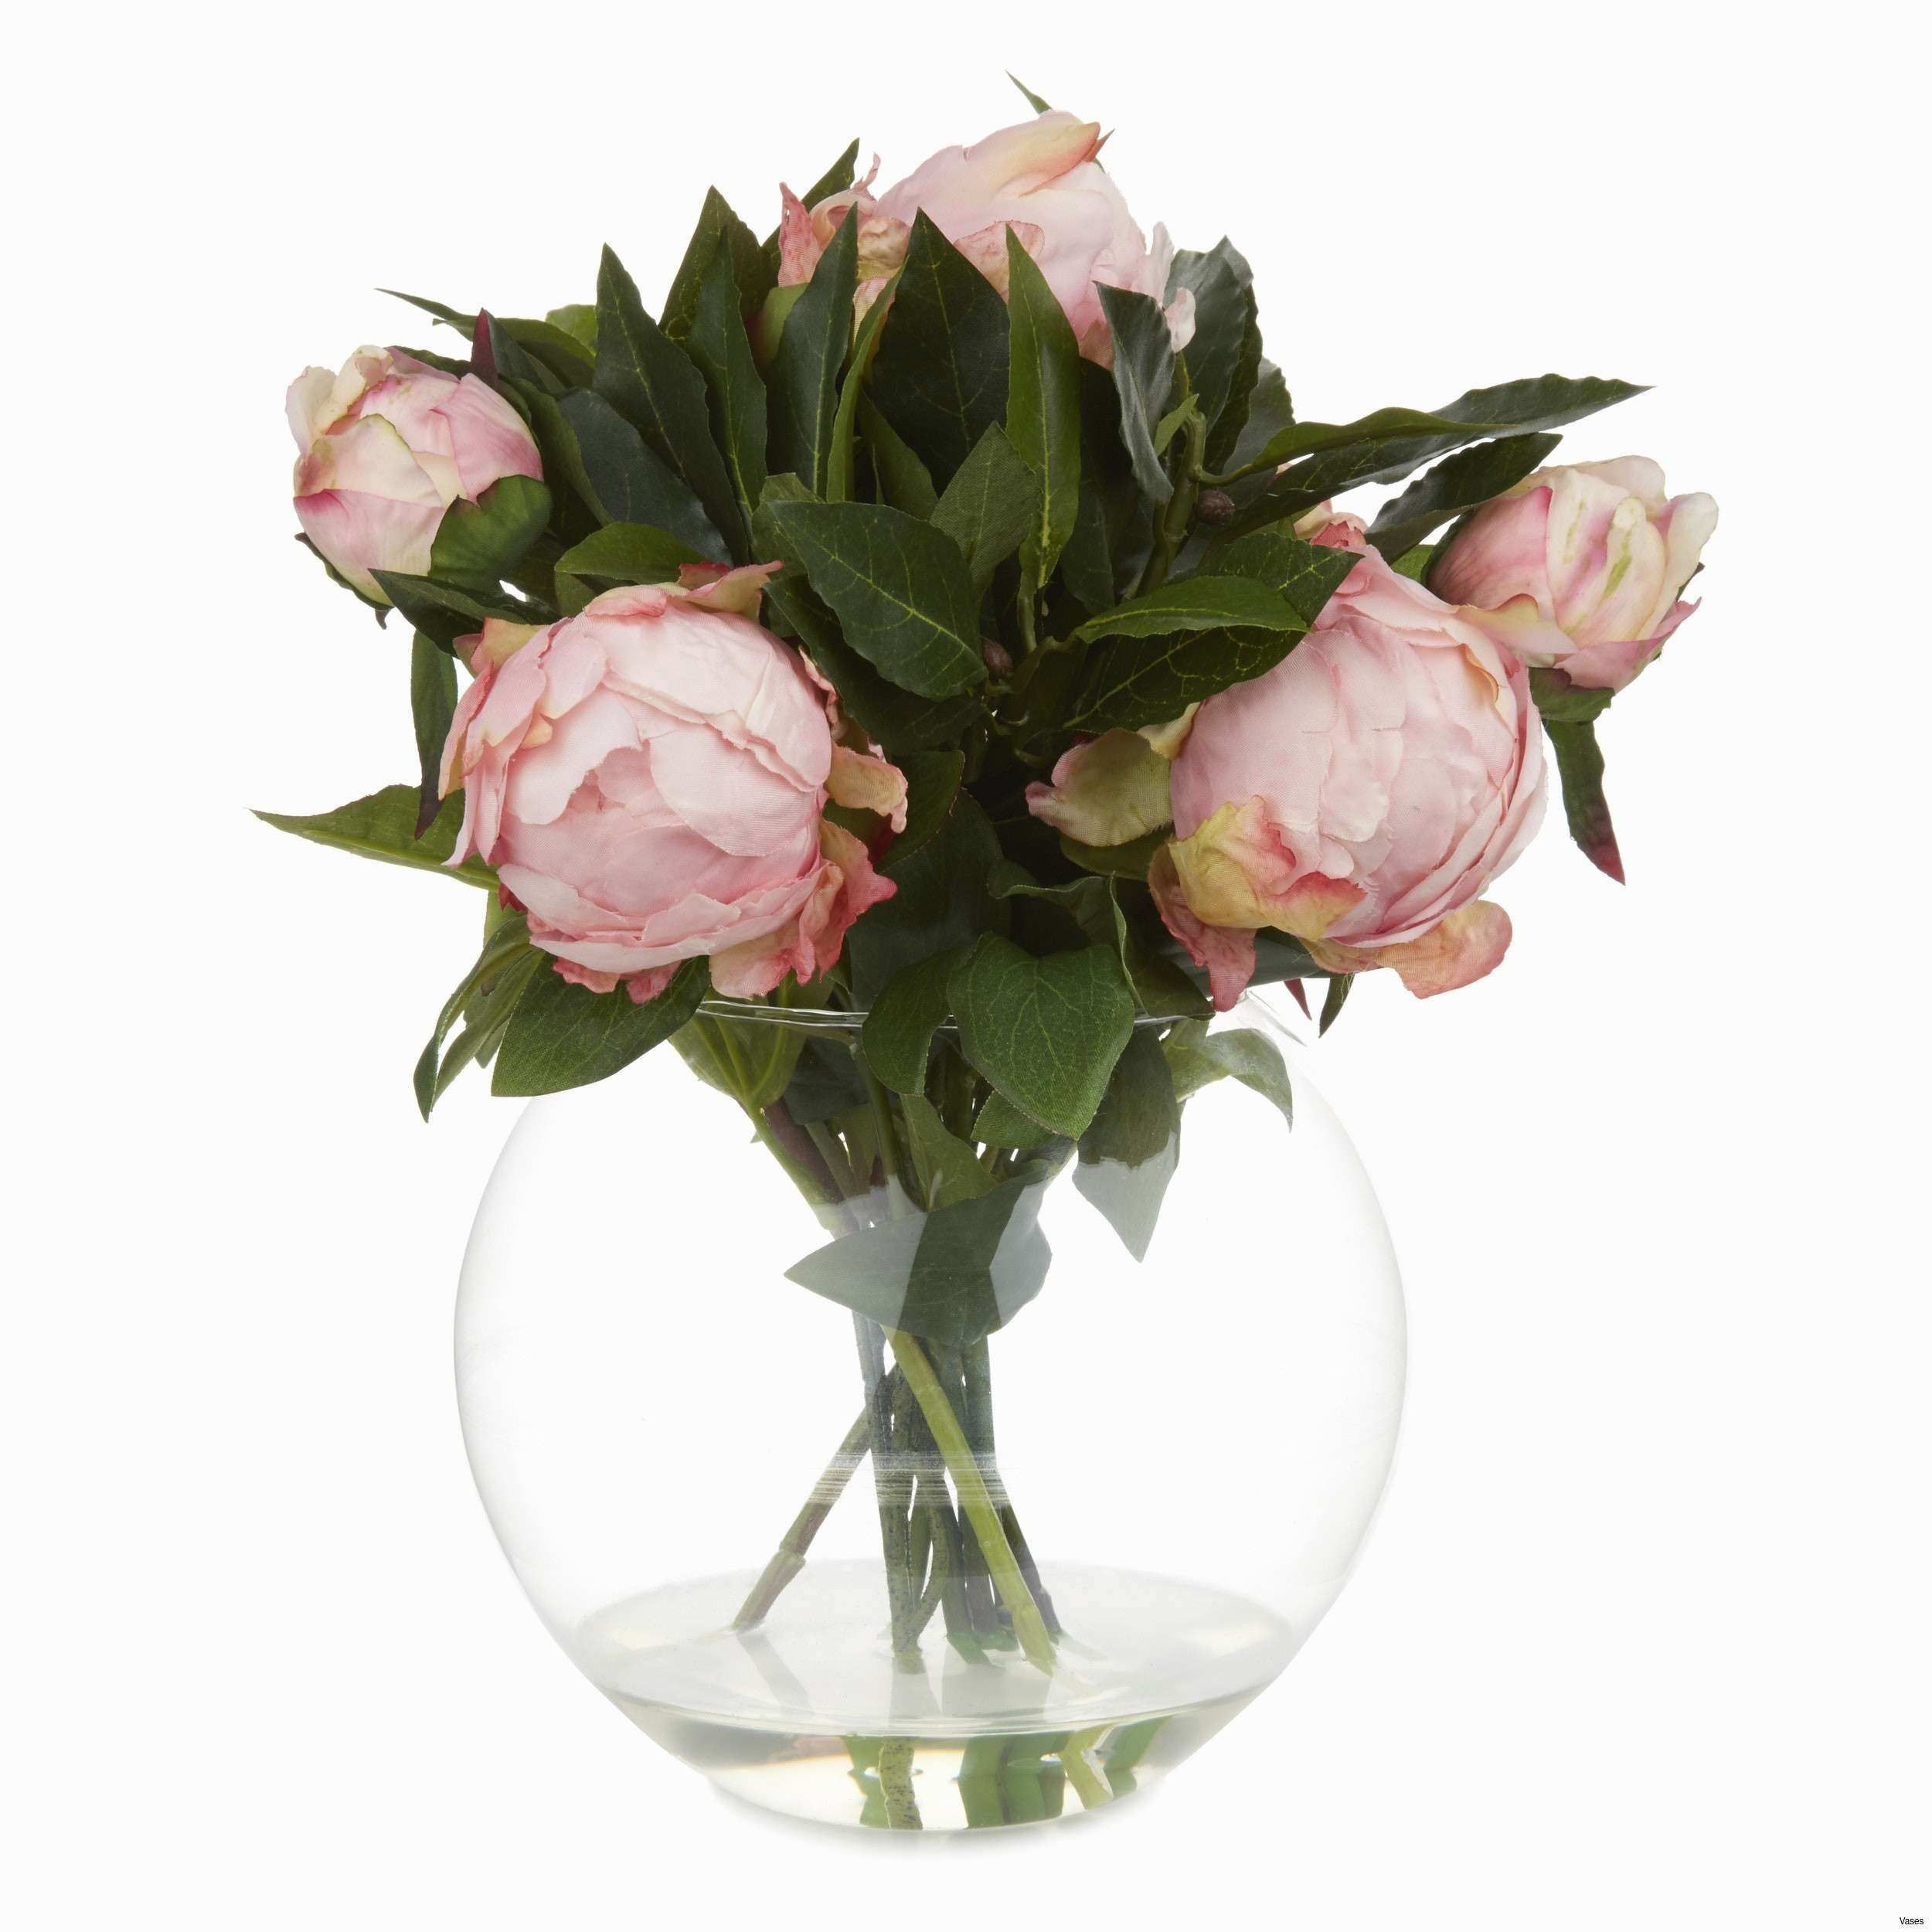 14 Recommended Small Glass Vases Amazon 2024 free download small glass vases amazon of 50 glass pedestal vase the weekly world inside glass pedestal vase elegant 37 wonderful church flowers pedestal arrangements of glass pedestal vase